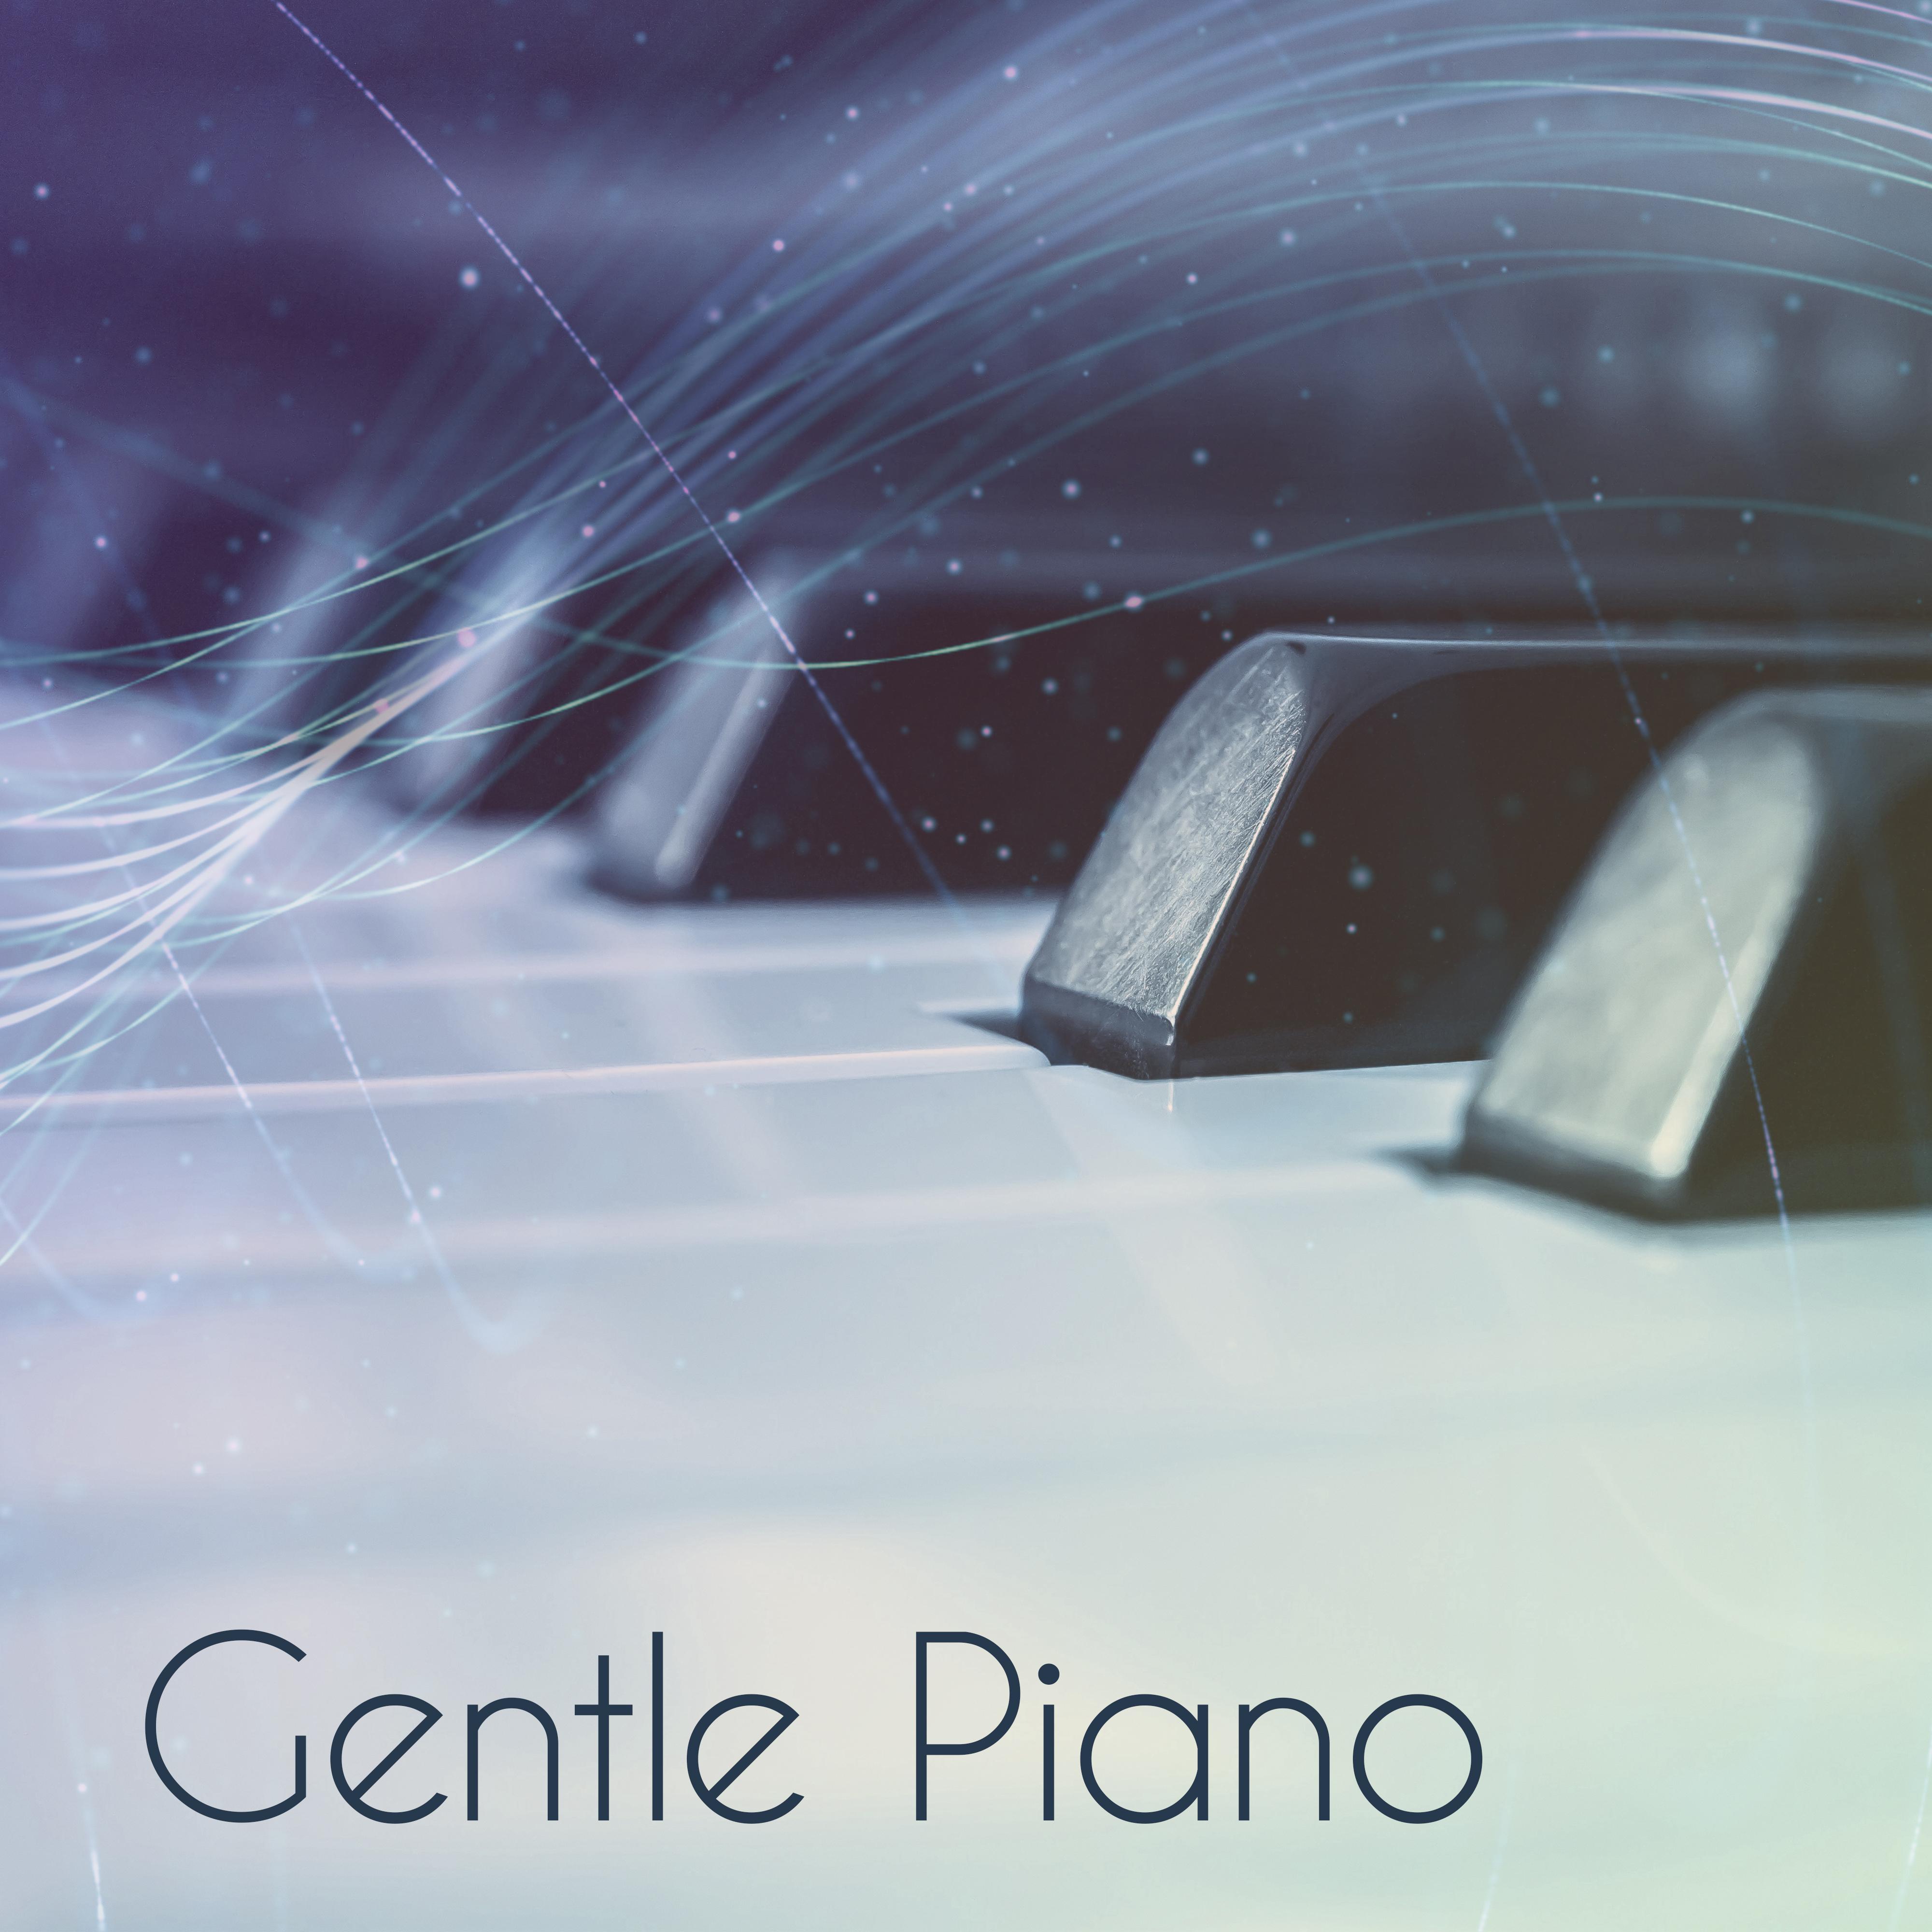 Gentle Piano  Simple Piano Music, Jazz Lounge, Relaxed Jazz, Ambient Relax at Home